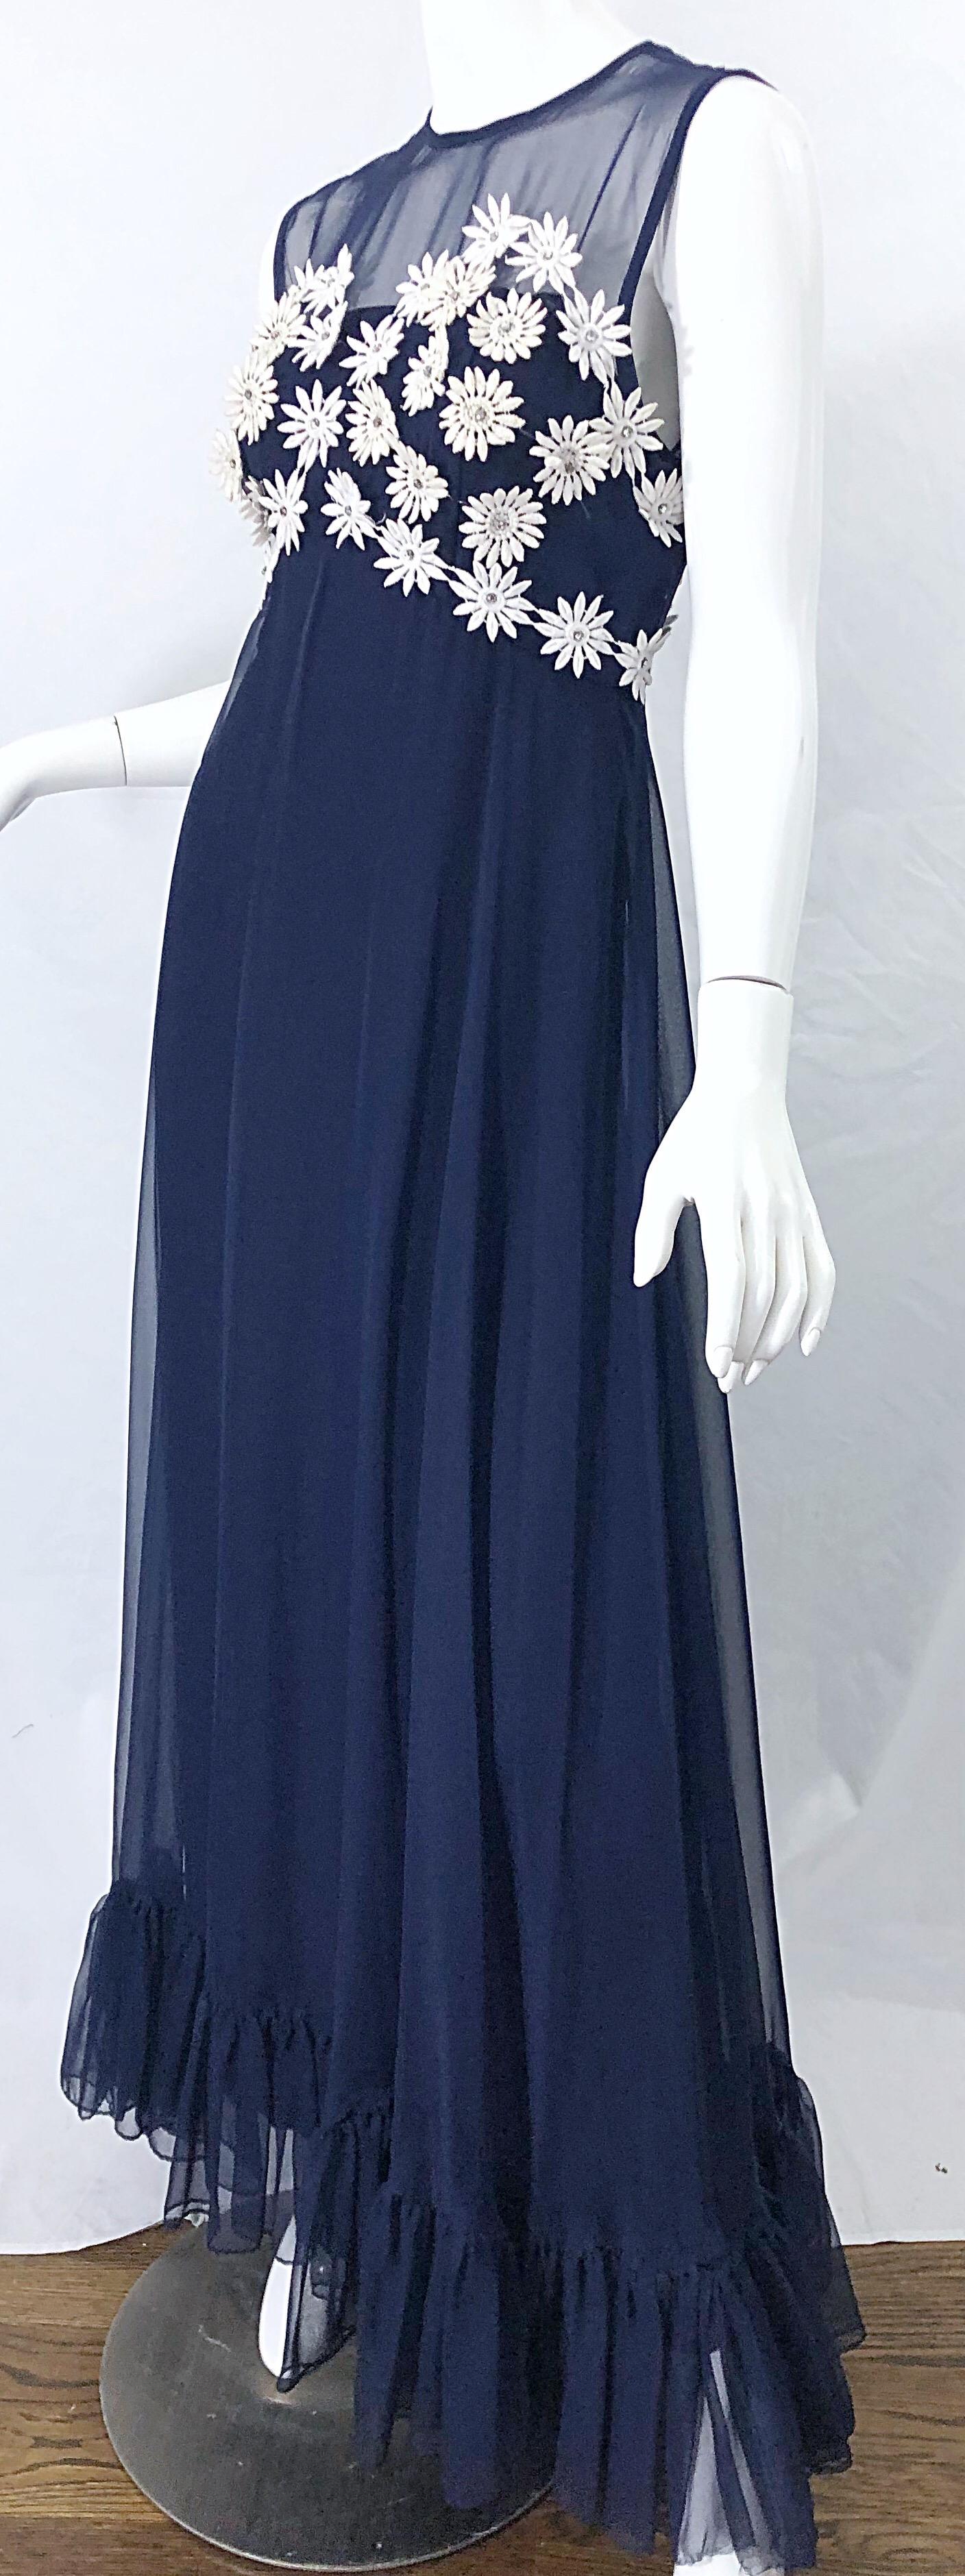 1960s Navy Blue Chiffon White Rhinestone Flowers Vintage 60s Gown Maxi Dress For Sale 1